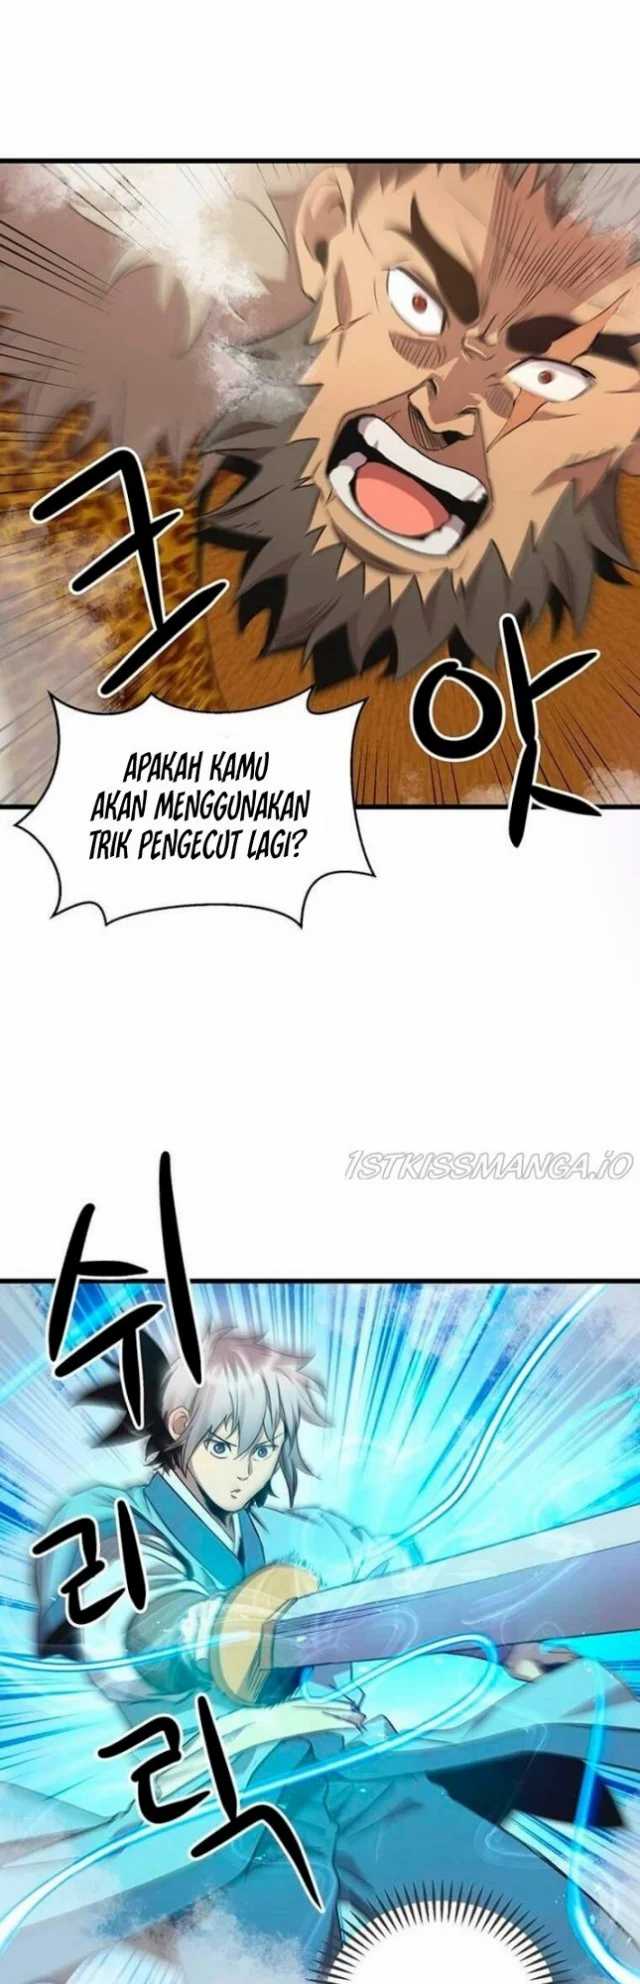 Strongest Fighter Chapter 79